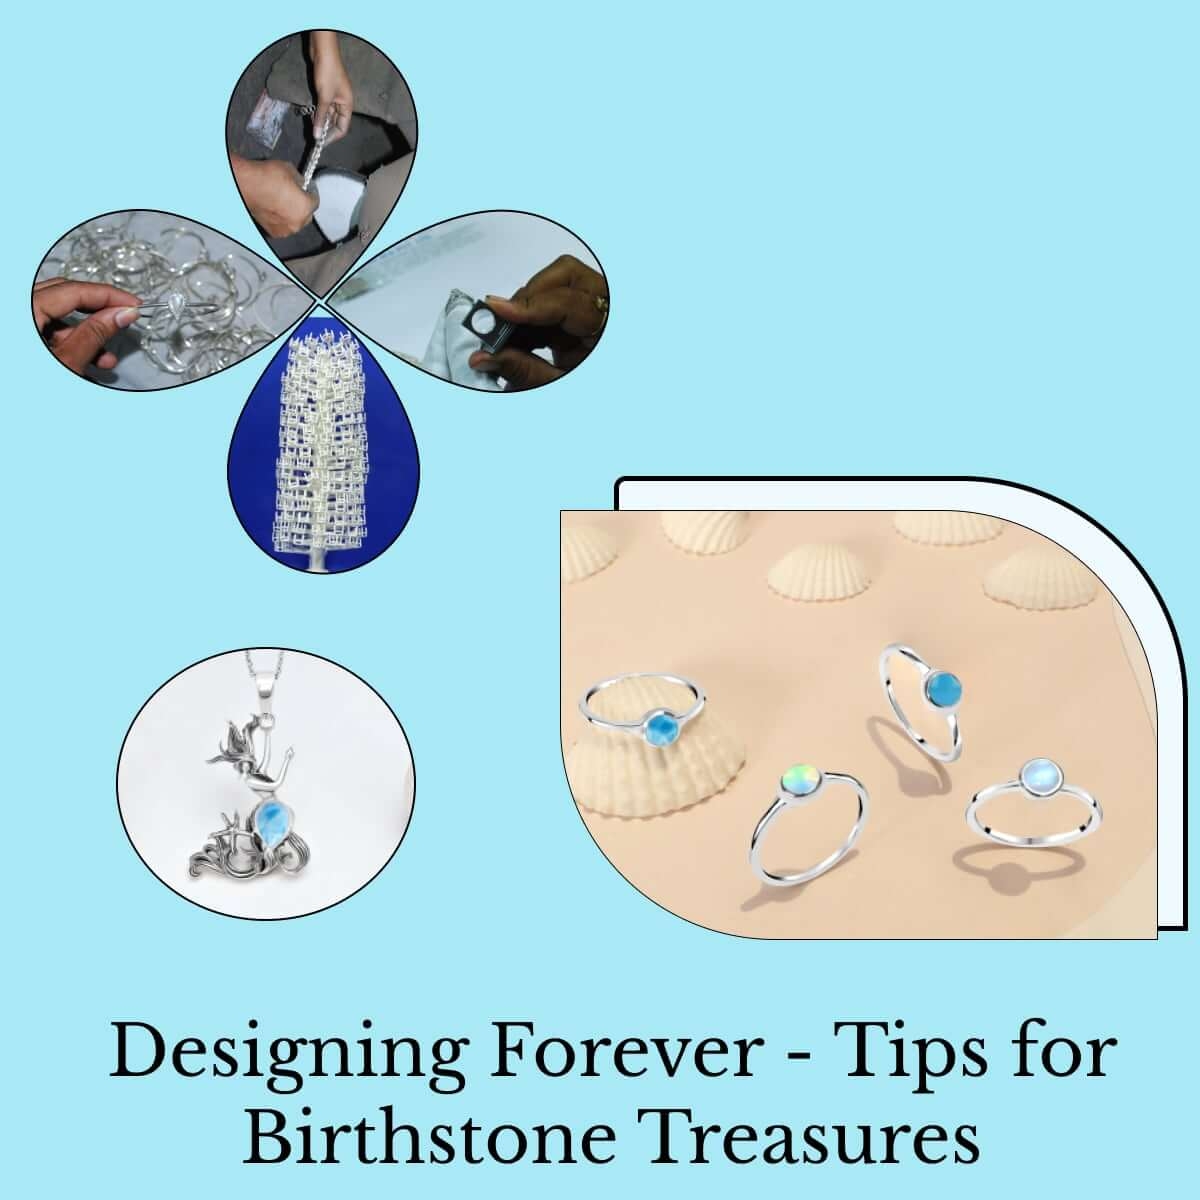 Tips for Creating Timeless Custom Birthstone Jewelry